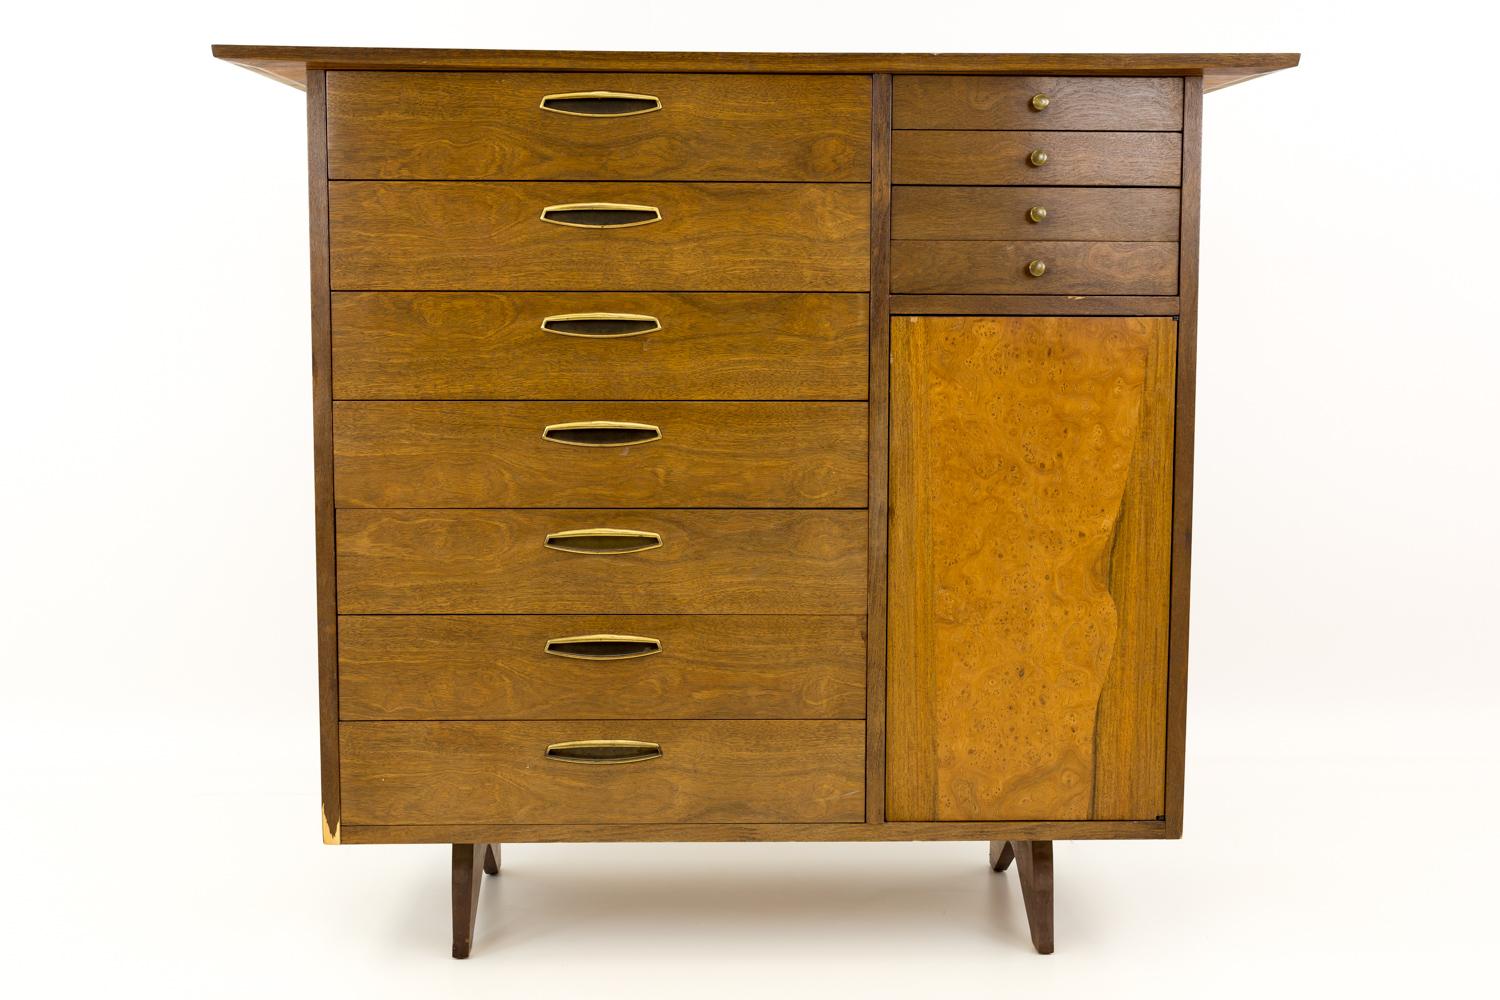 George Nakashima for Widdicomb Origins midcentury highboy dresser
Measures 56 wide x 20 deep x 49.5 inches high

Great vintage condition - there are some small wear marks that can be touched up by our Master Woodworker before shipping.

All